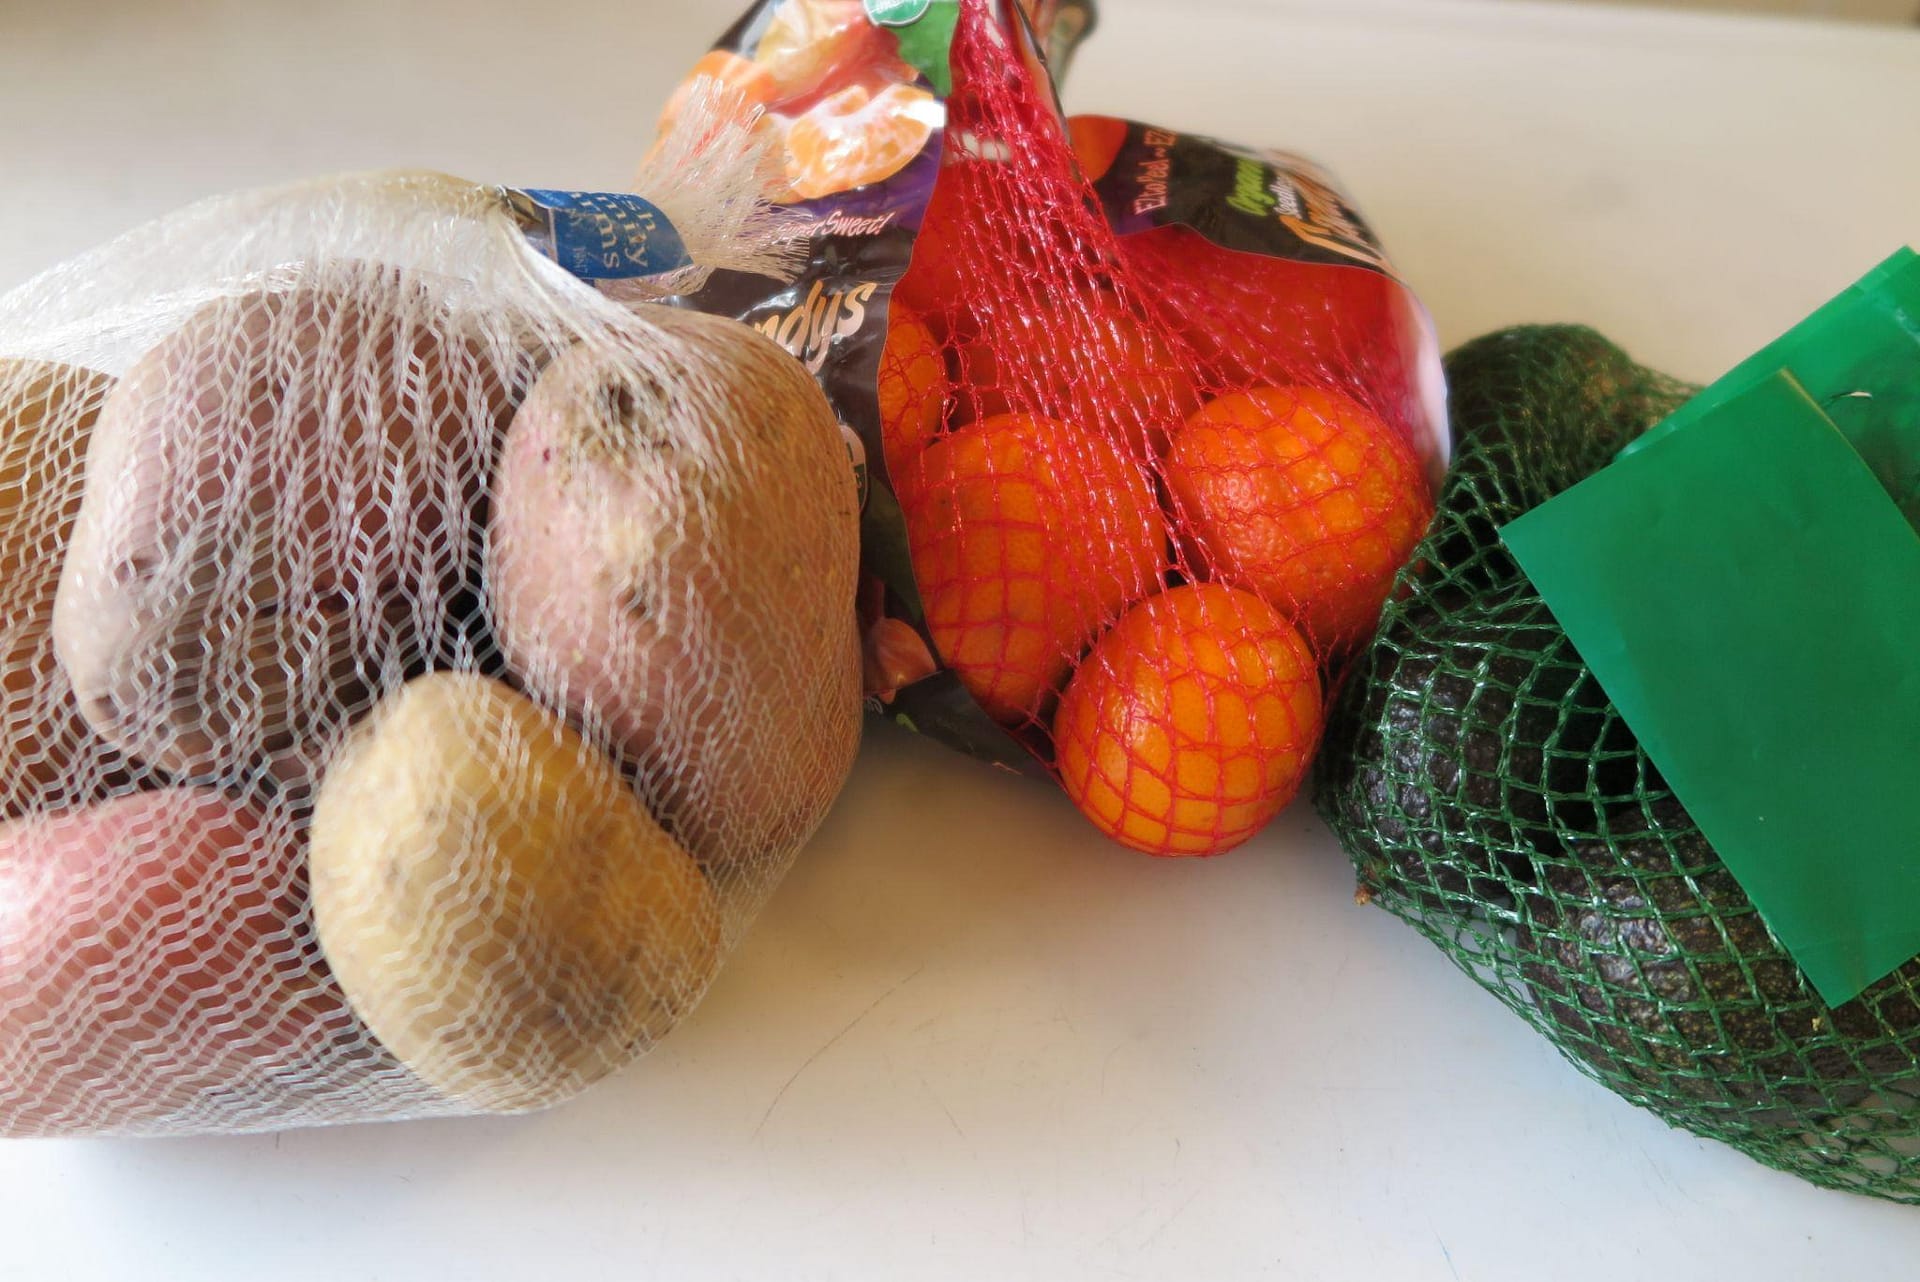 Potatoes, clementines, and avocados in plastic mesh produce bags showing the different types and textures the bags come in